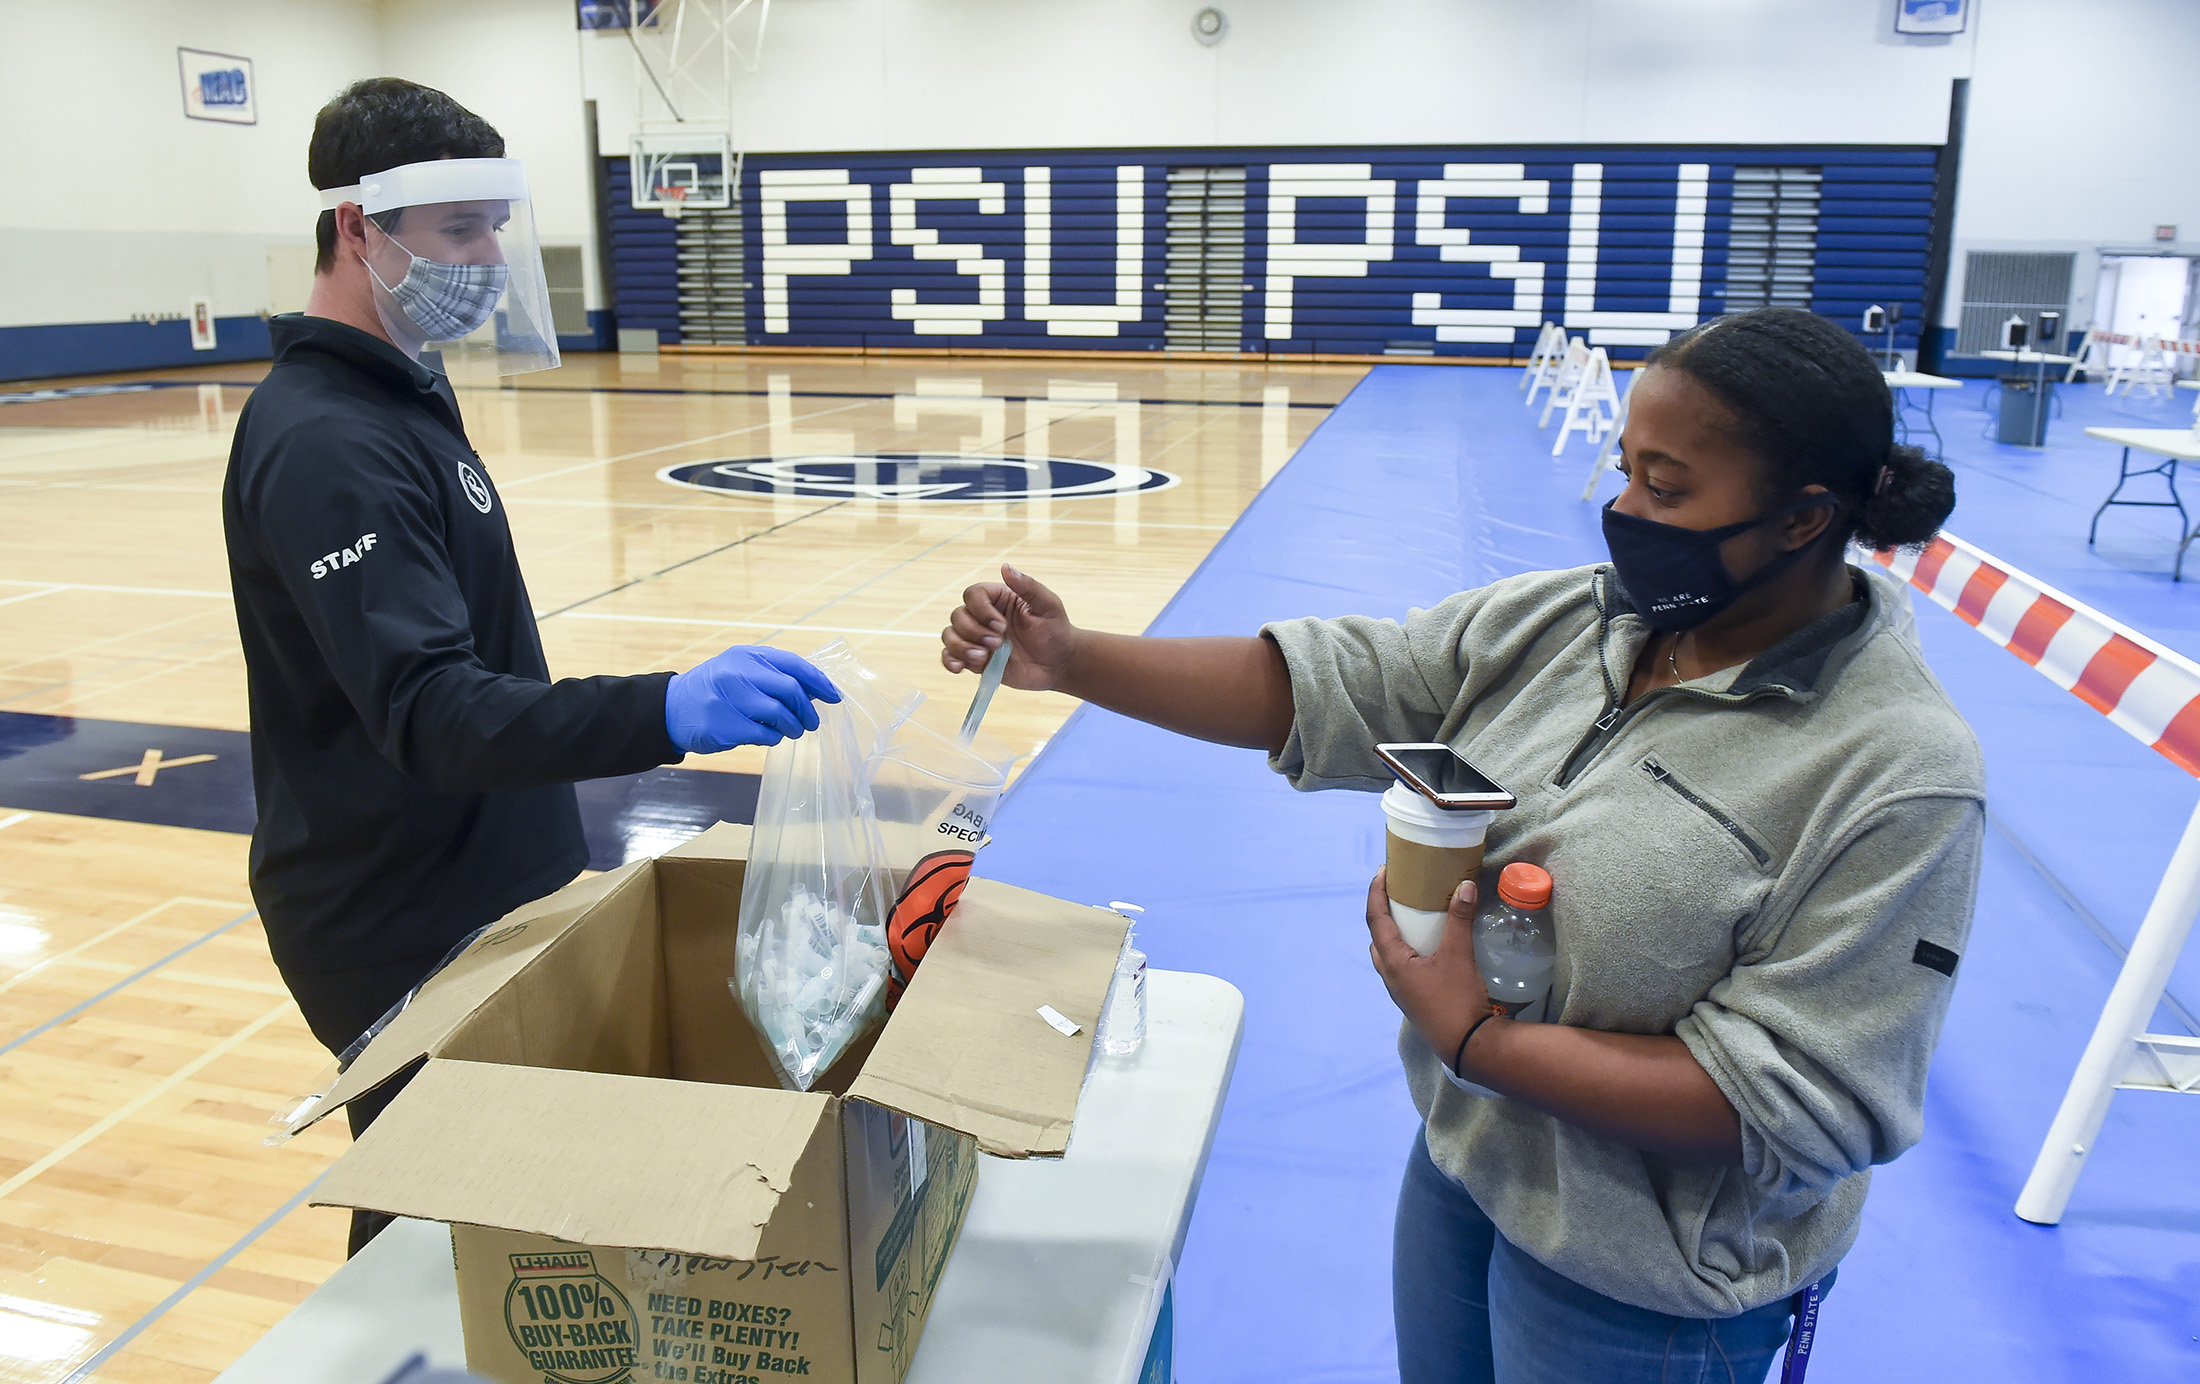 A Penn State University student places a Covid-19 departure test into a collection bag ahead of Thanksgiving holiday travel on Nov. 16.